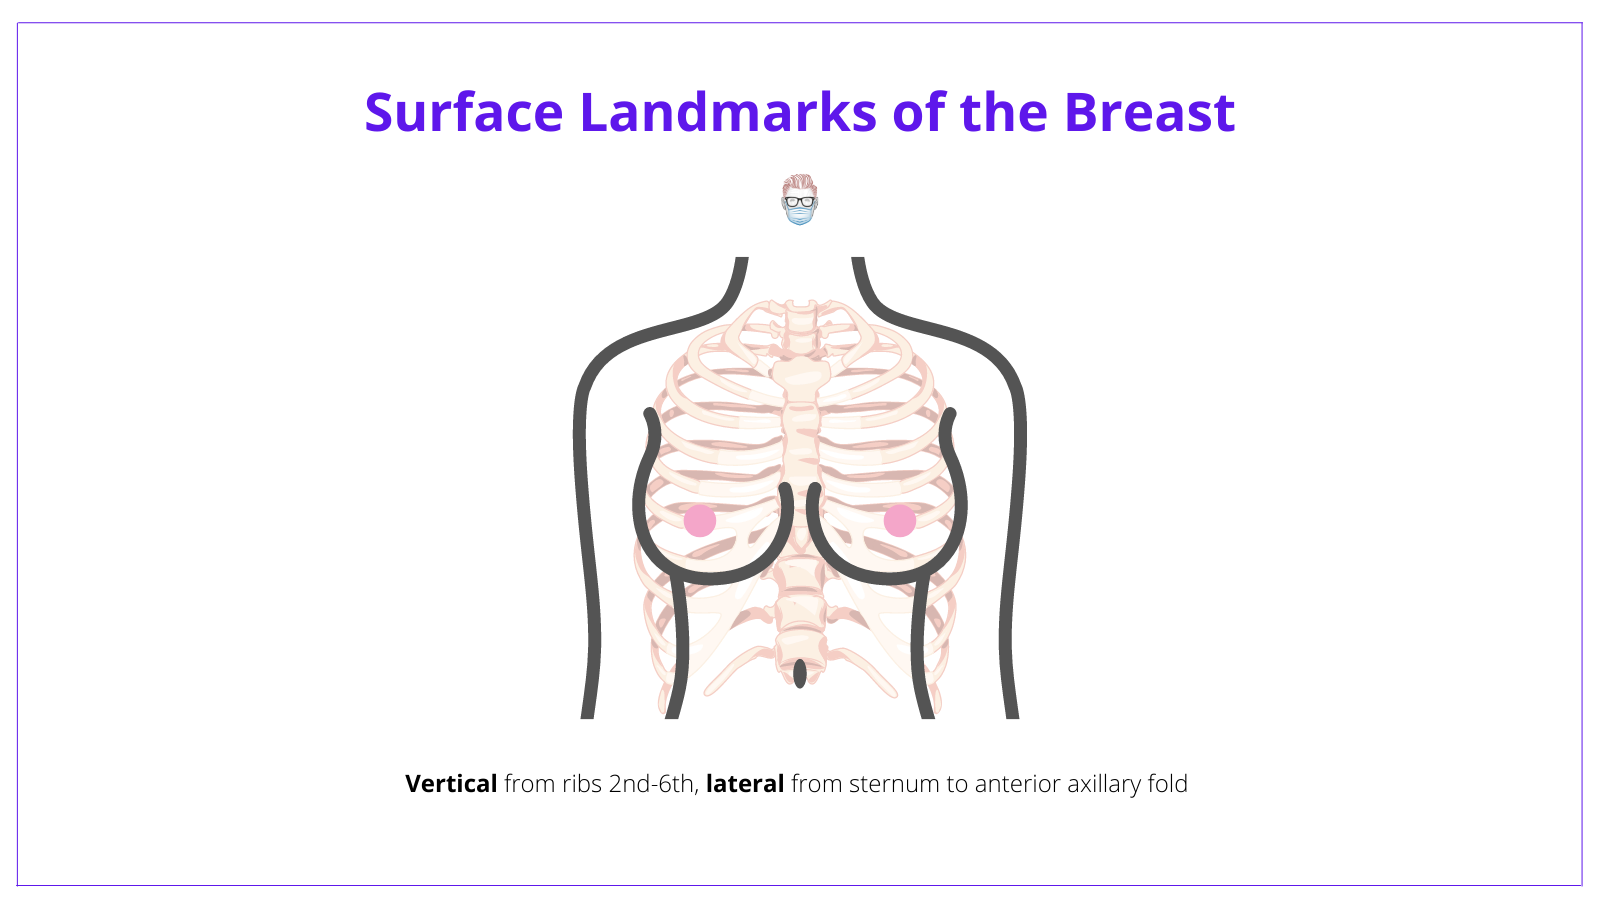 Human Anatomy of Female Breast - SuperStock